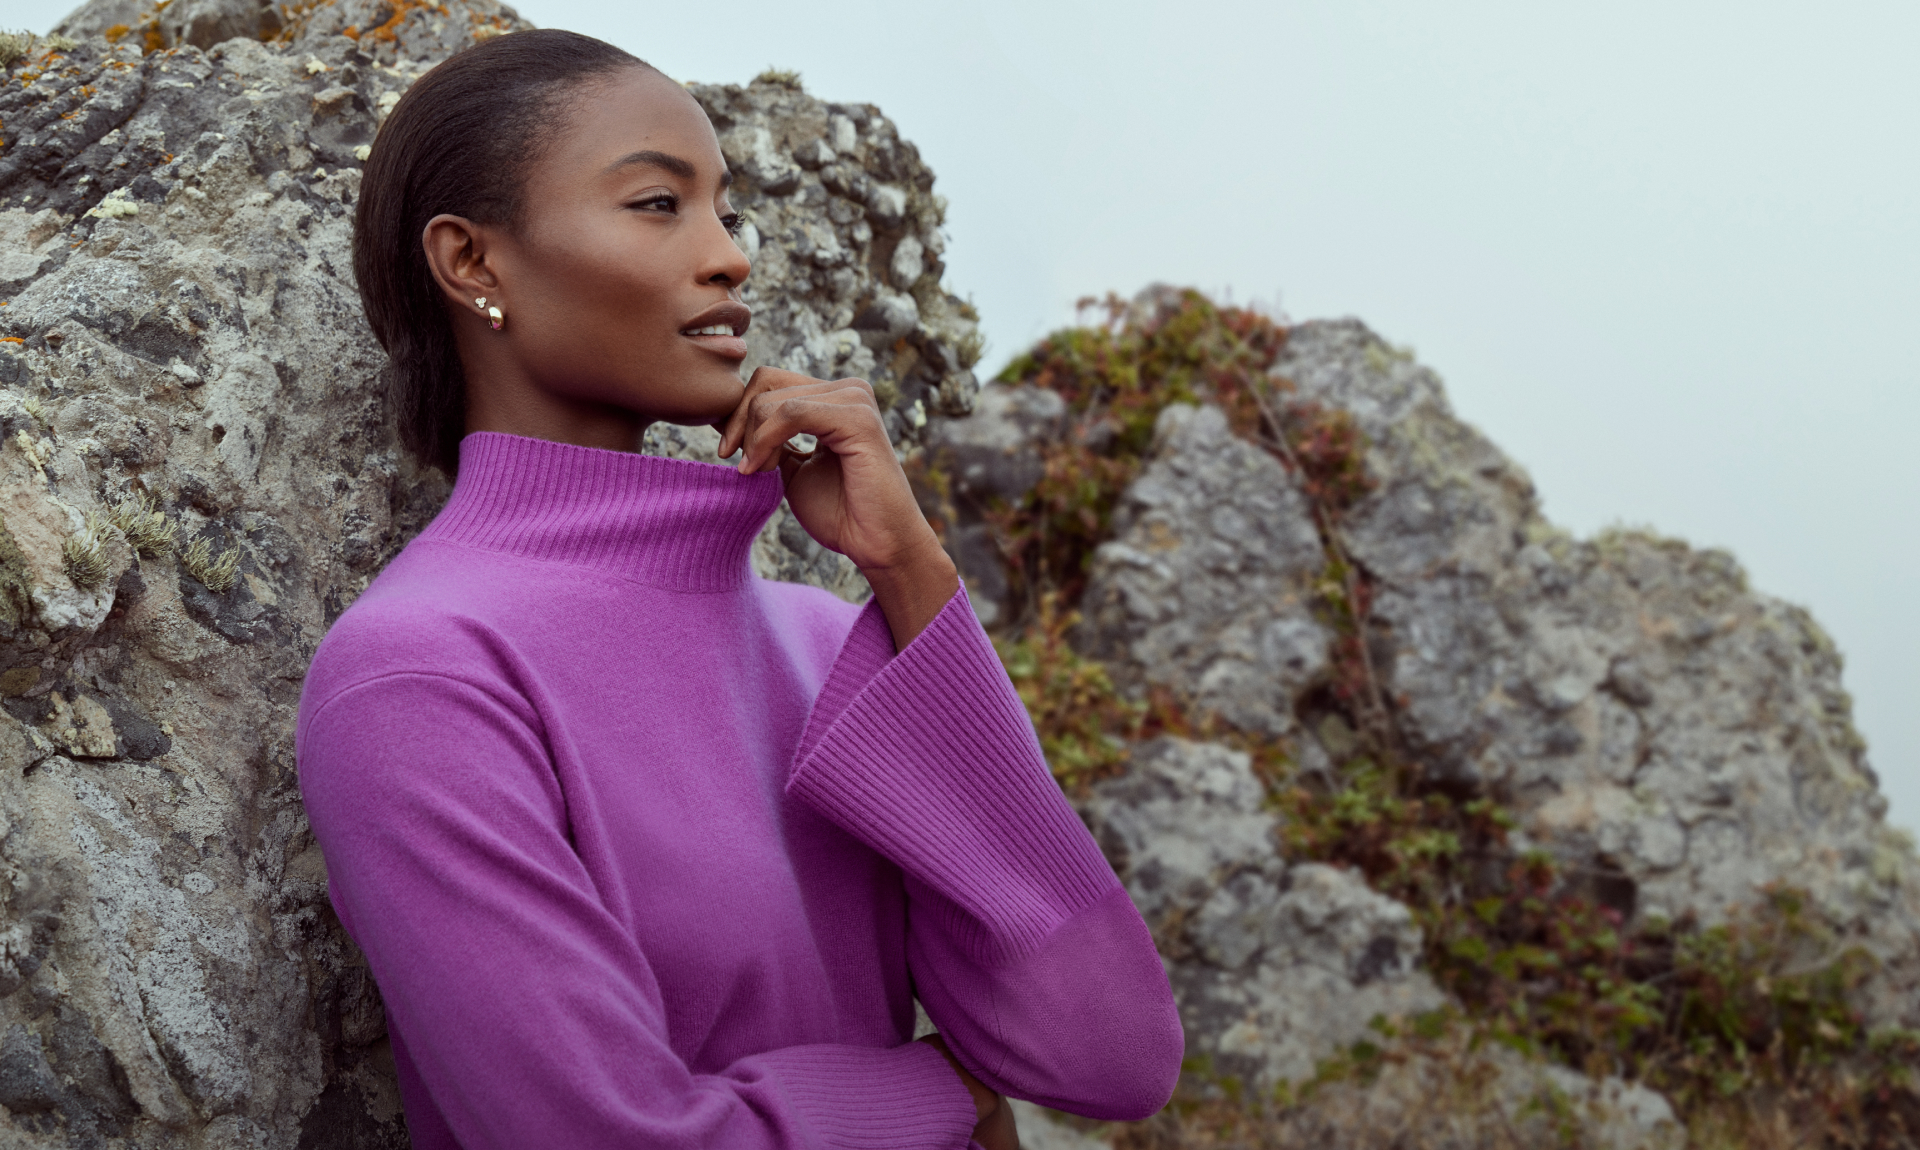 The Coziest Sweaters. The unrivaled warmth of Merino wool. Supremely soft cashmere. Explore our favorites to gift or give yourself. Shop Sweaters.